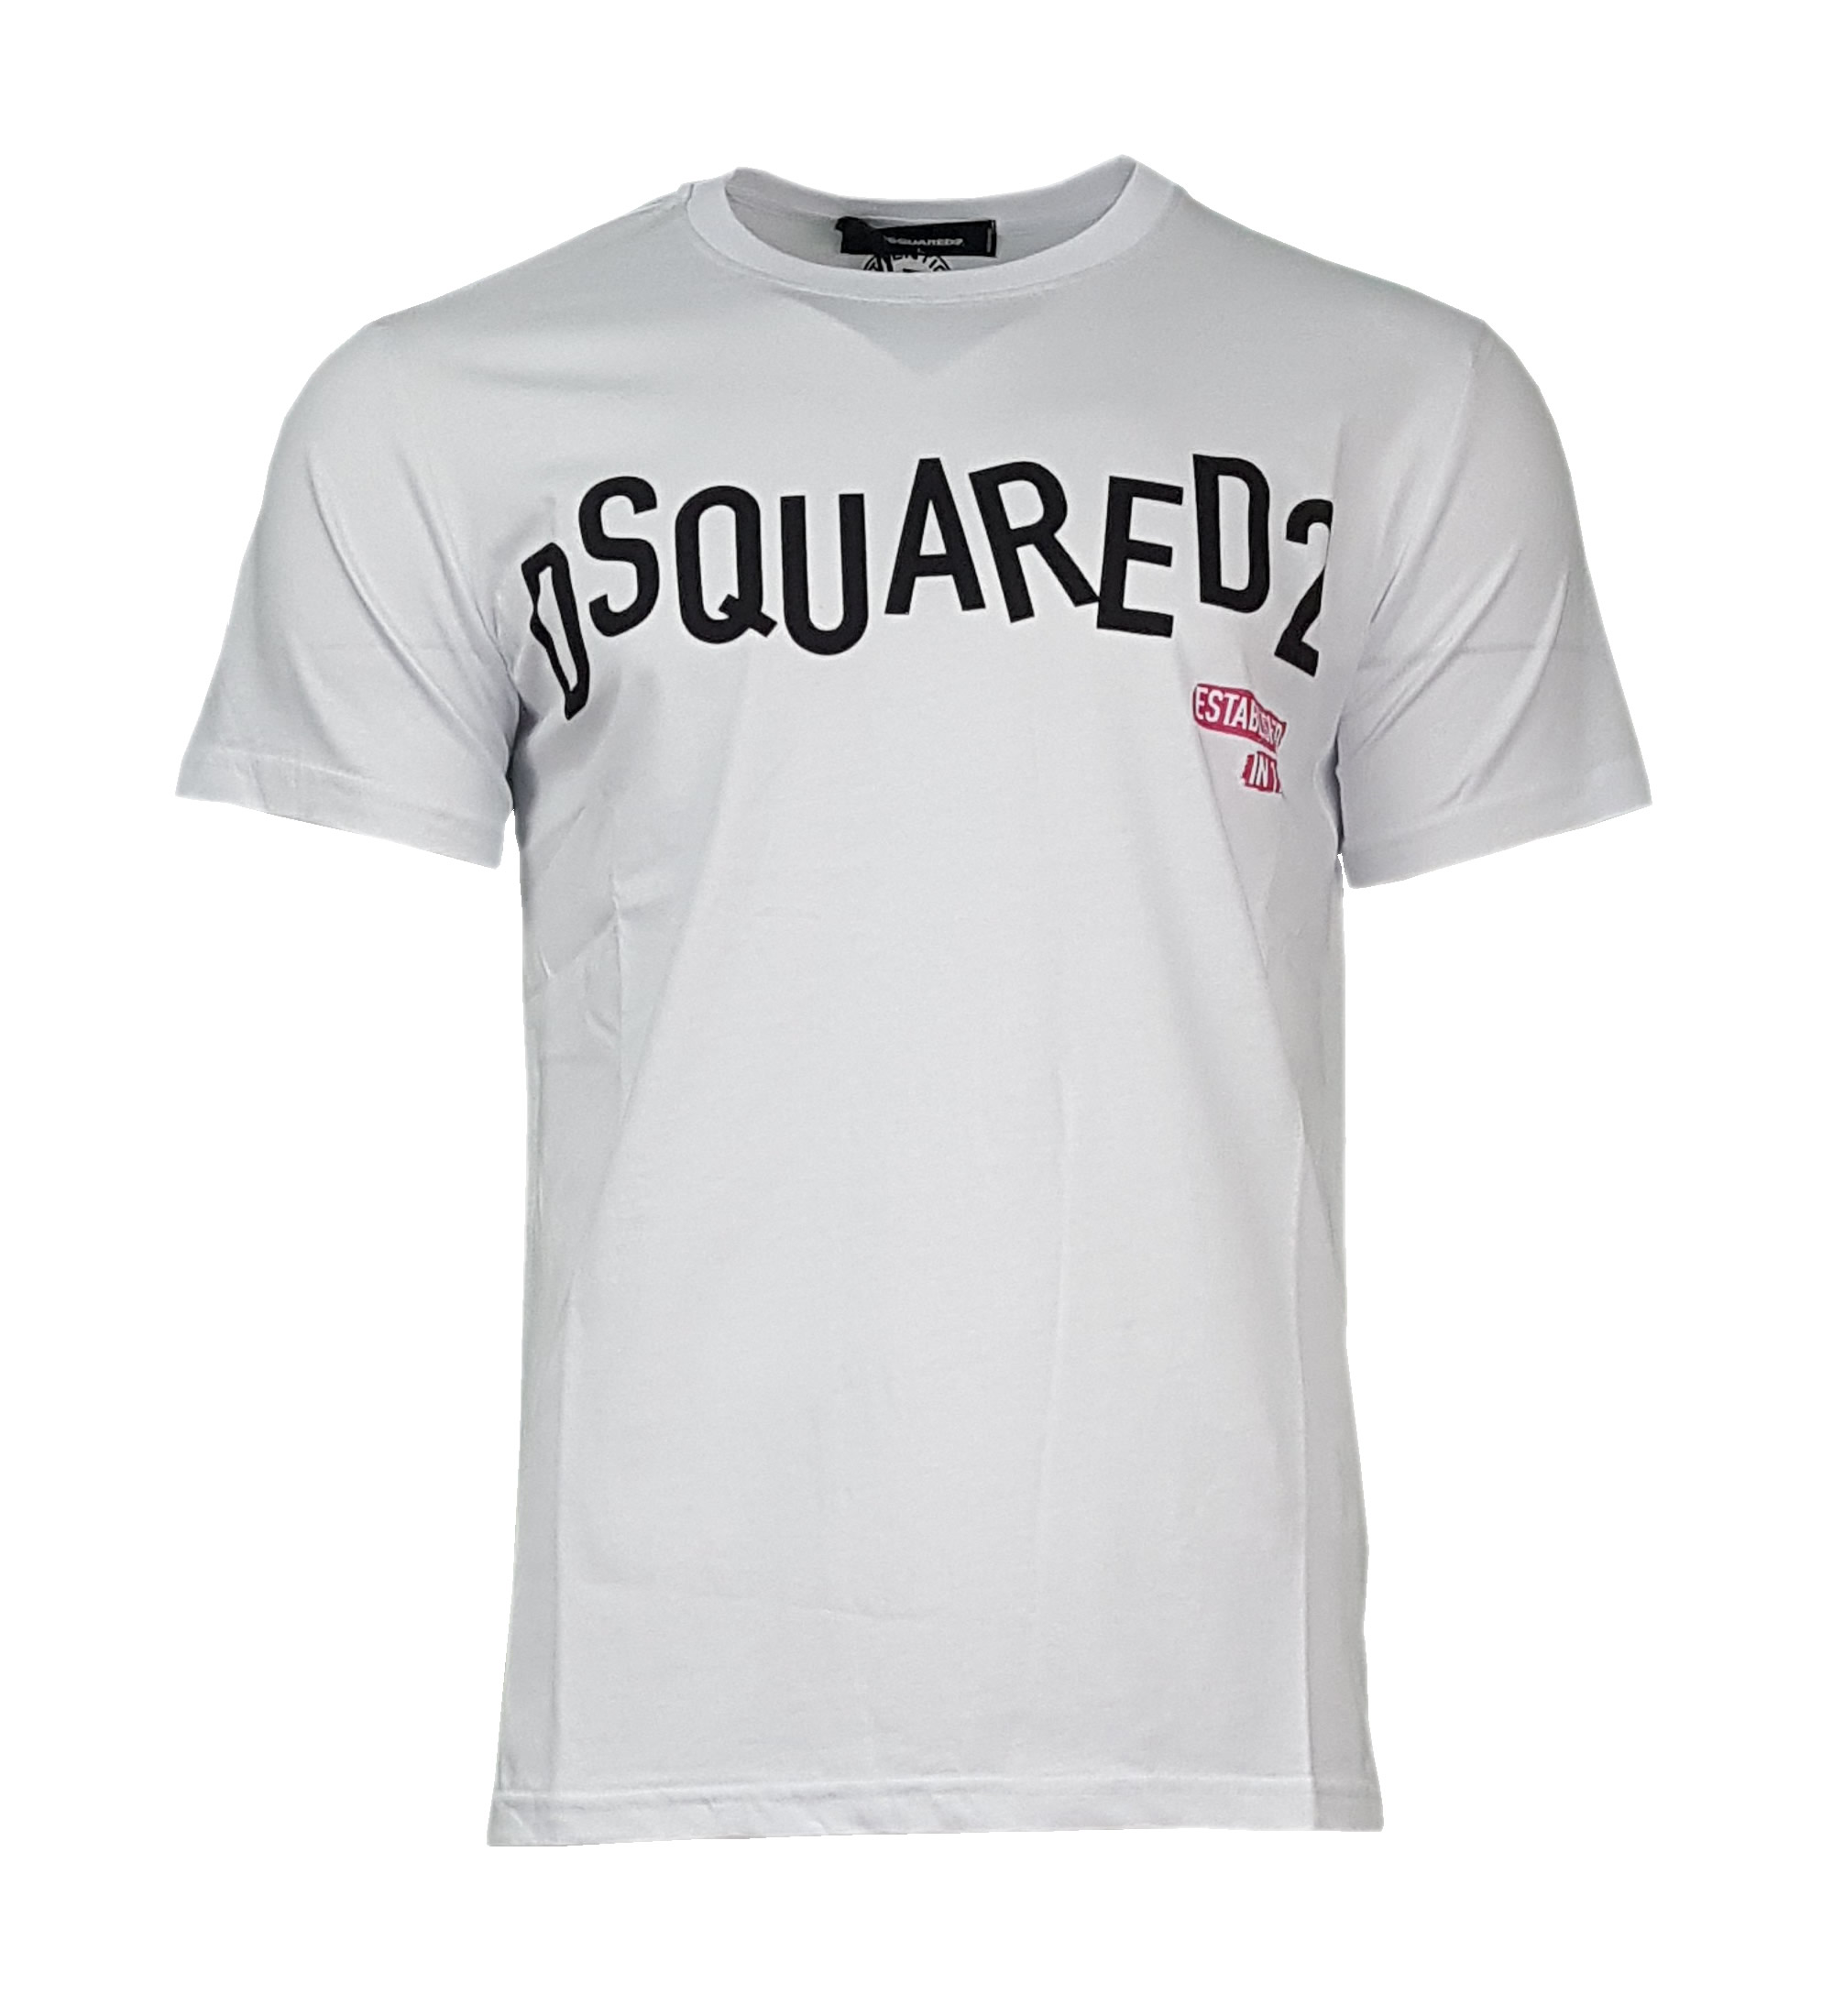 DSquared2 T Shirt with Uneven Logo, in White - INTOTO7 Menswear